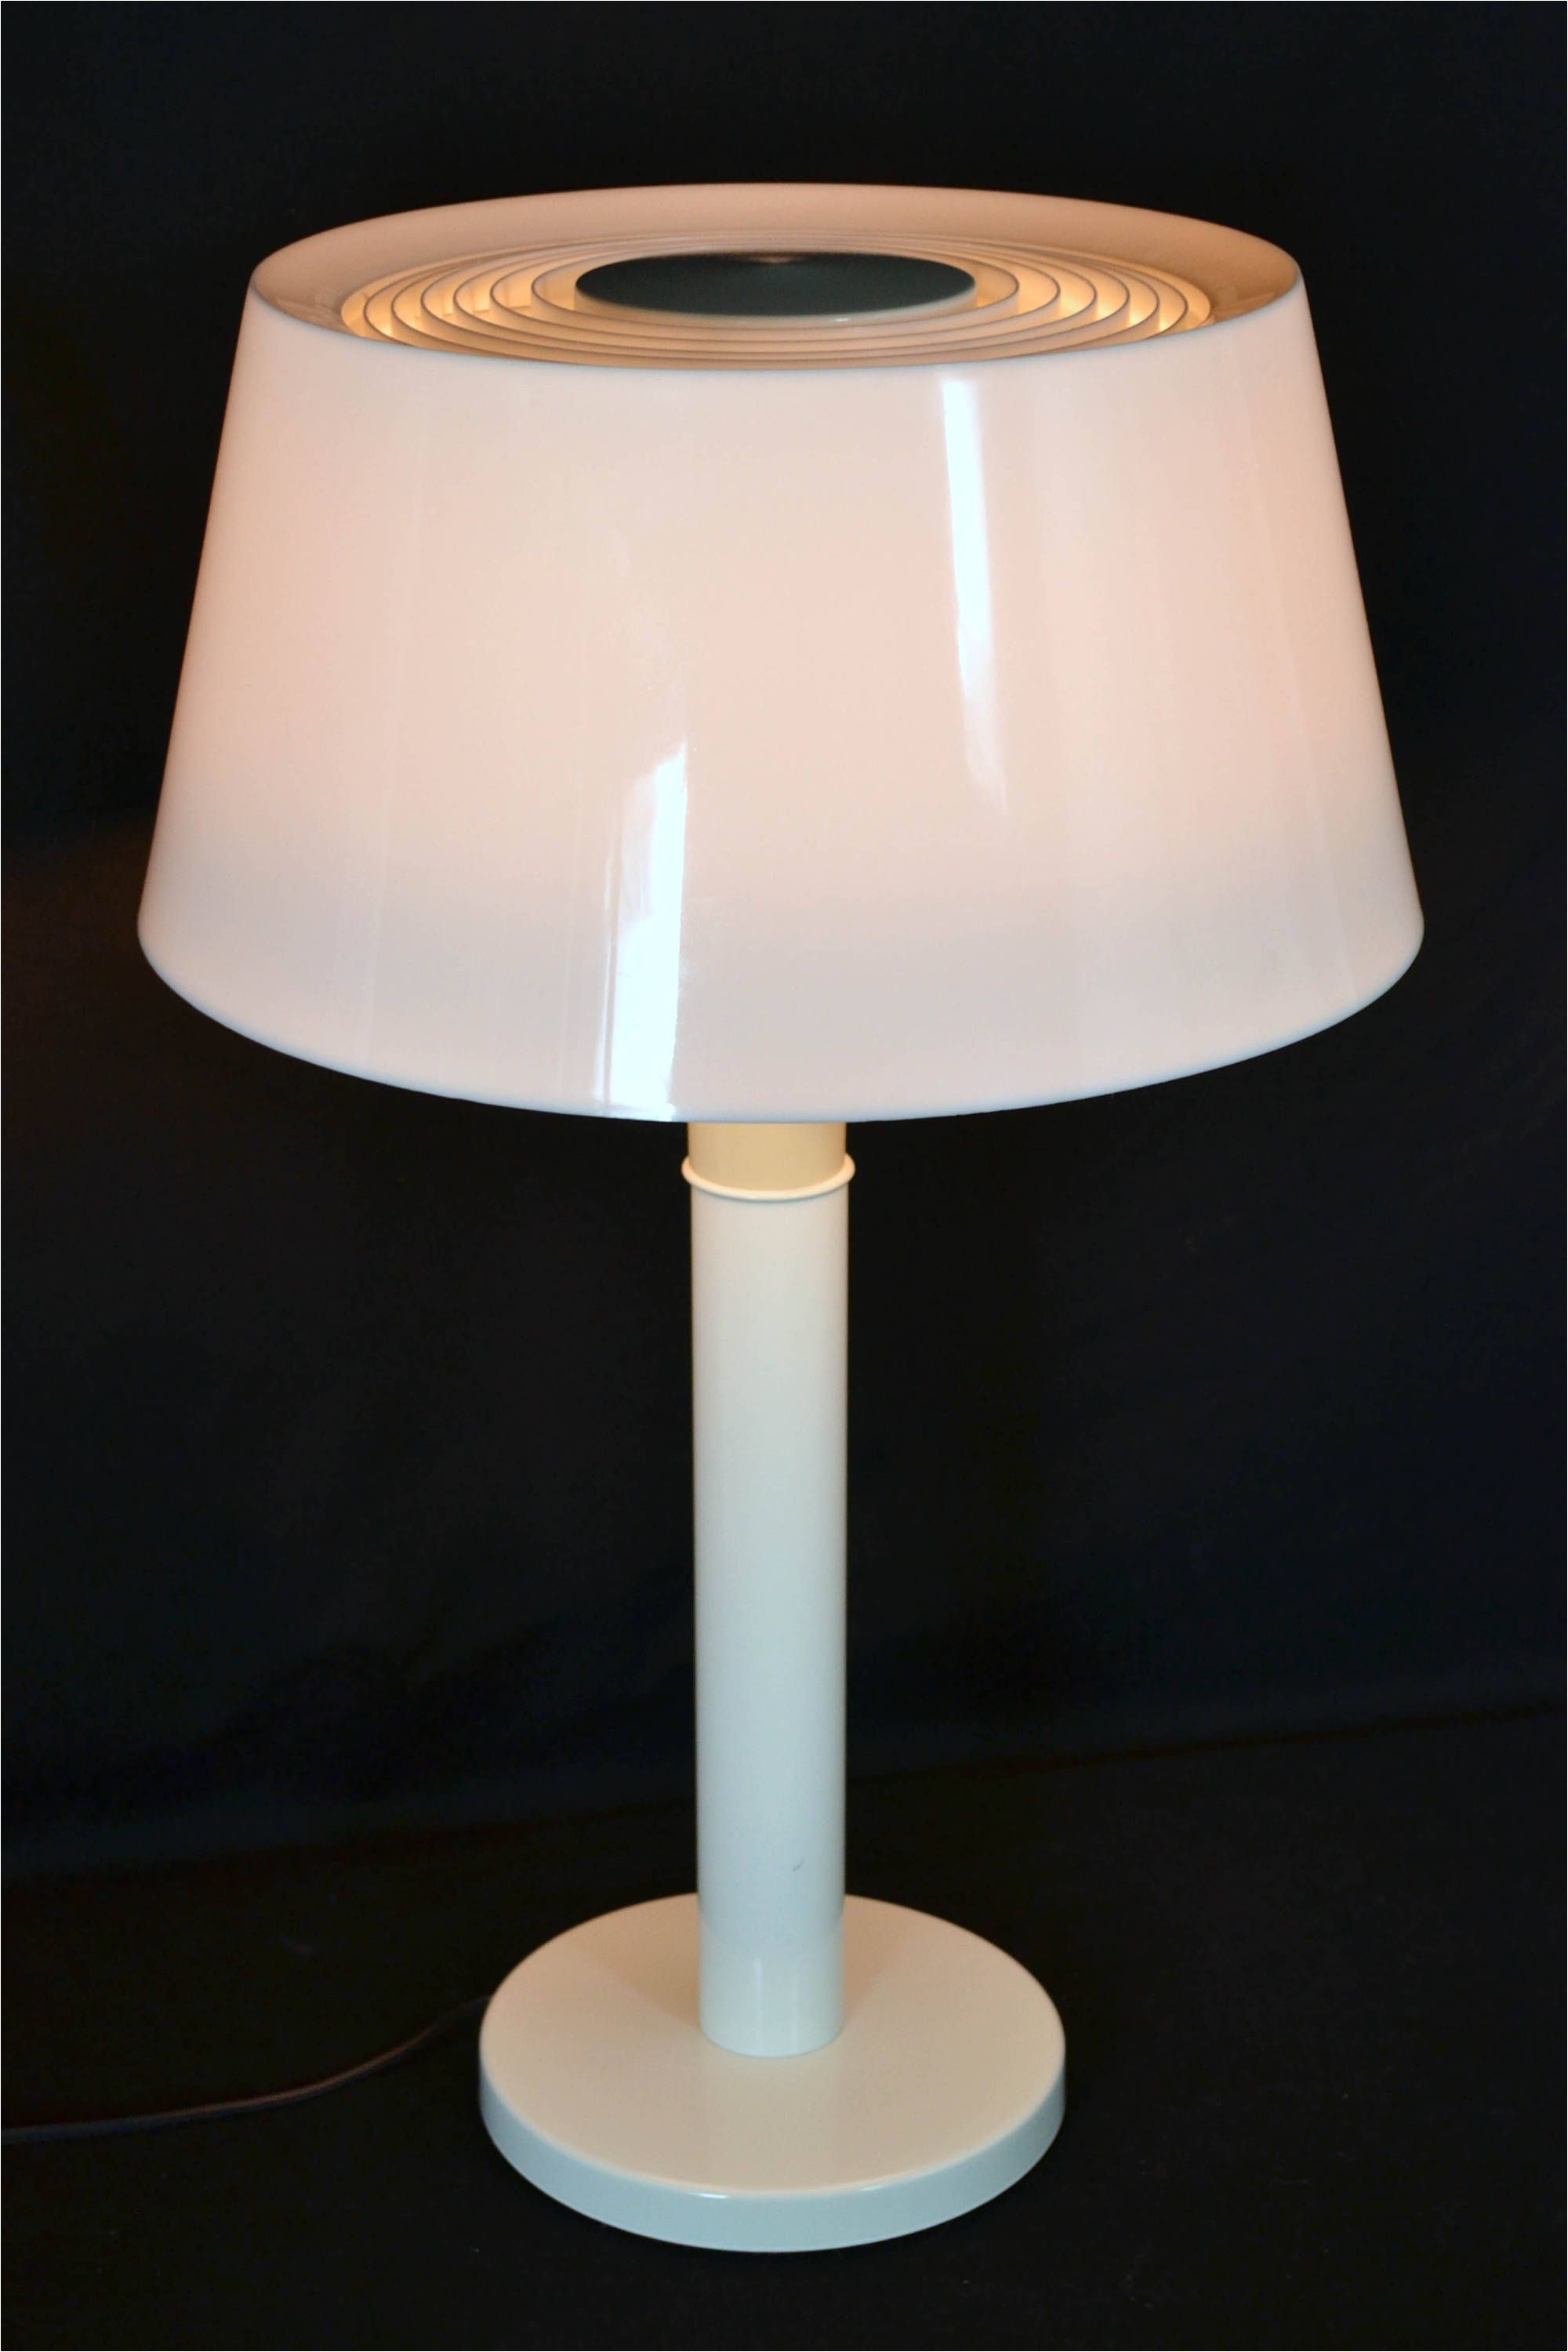 Mustard Yellow Floor Lamp White Table Lamp by Gerard Thurston for Lightolier by